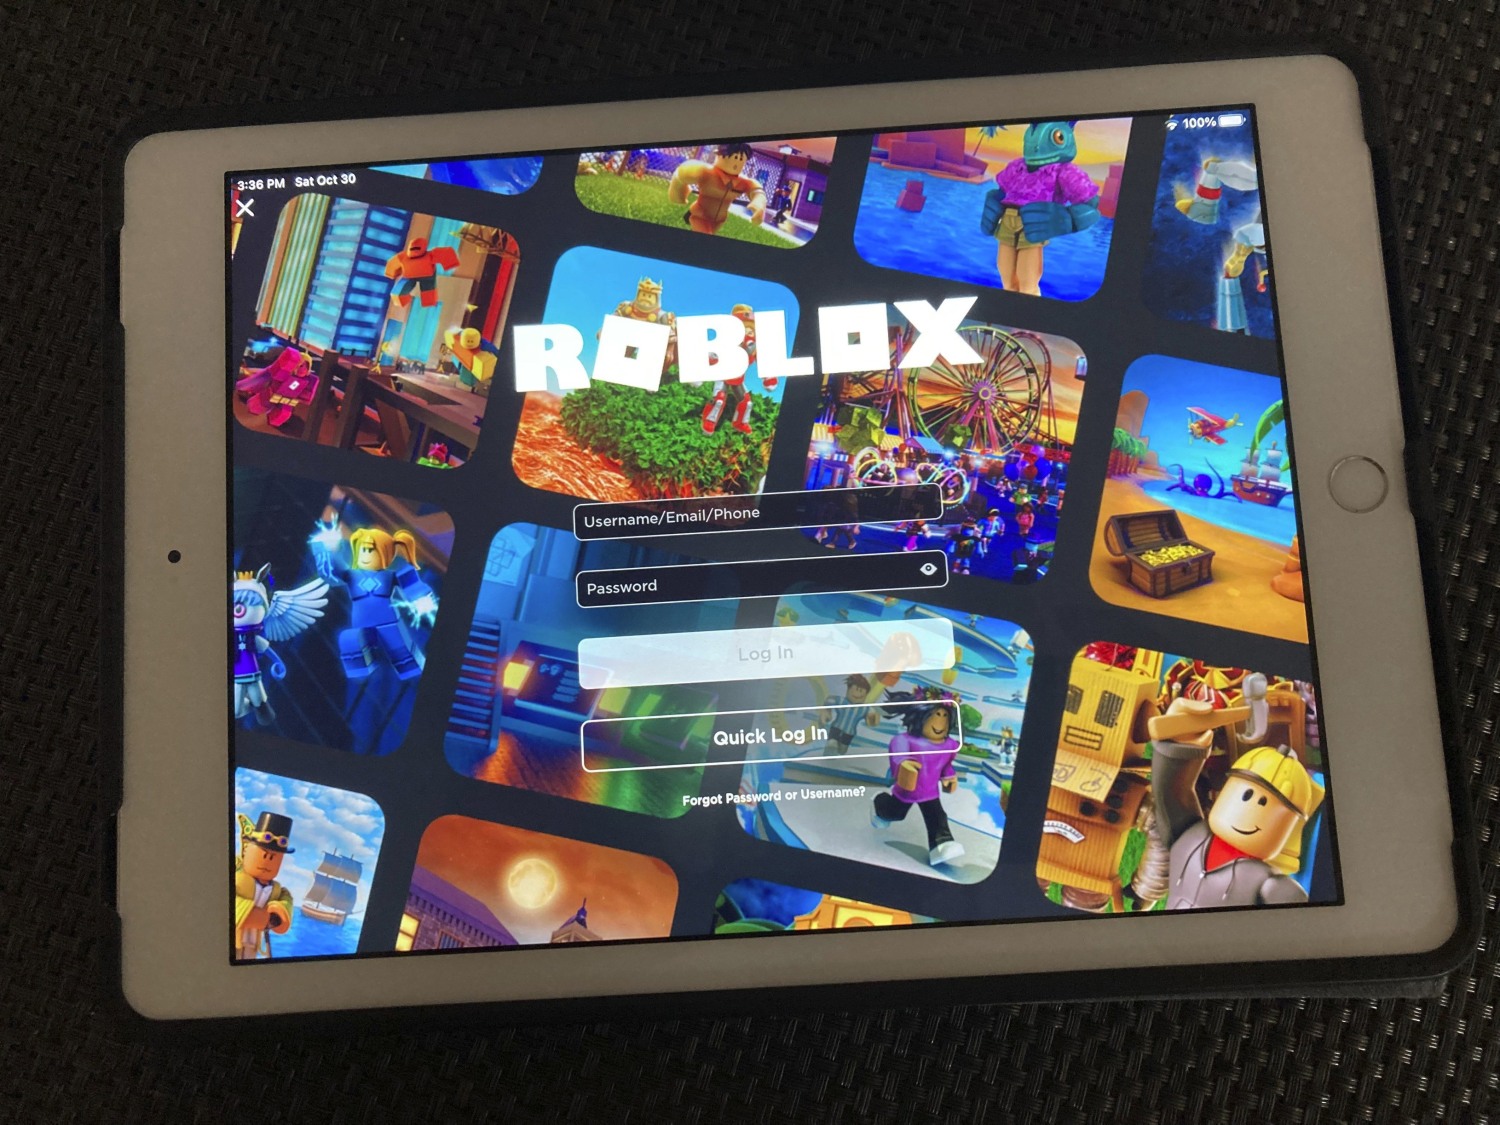 NEWS: Roblox officially states it's back on Twitter